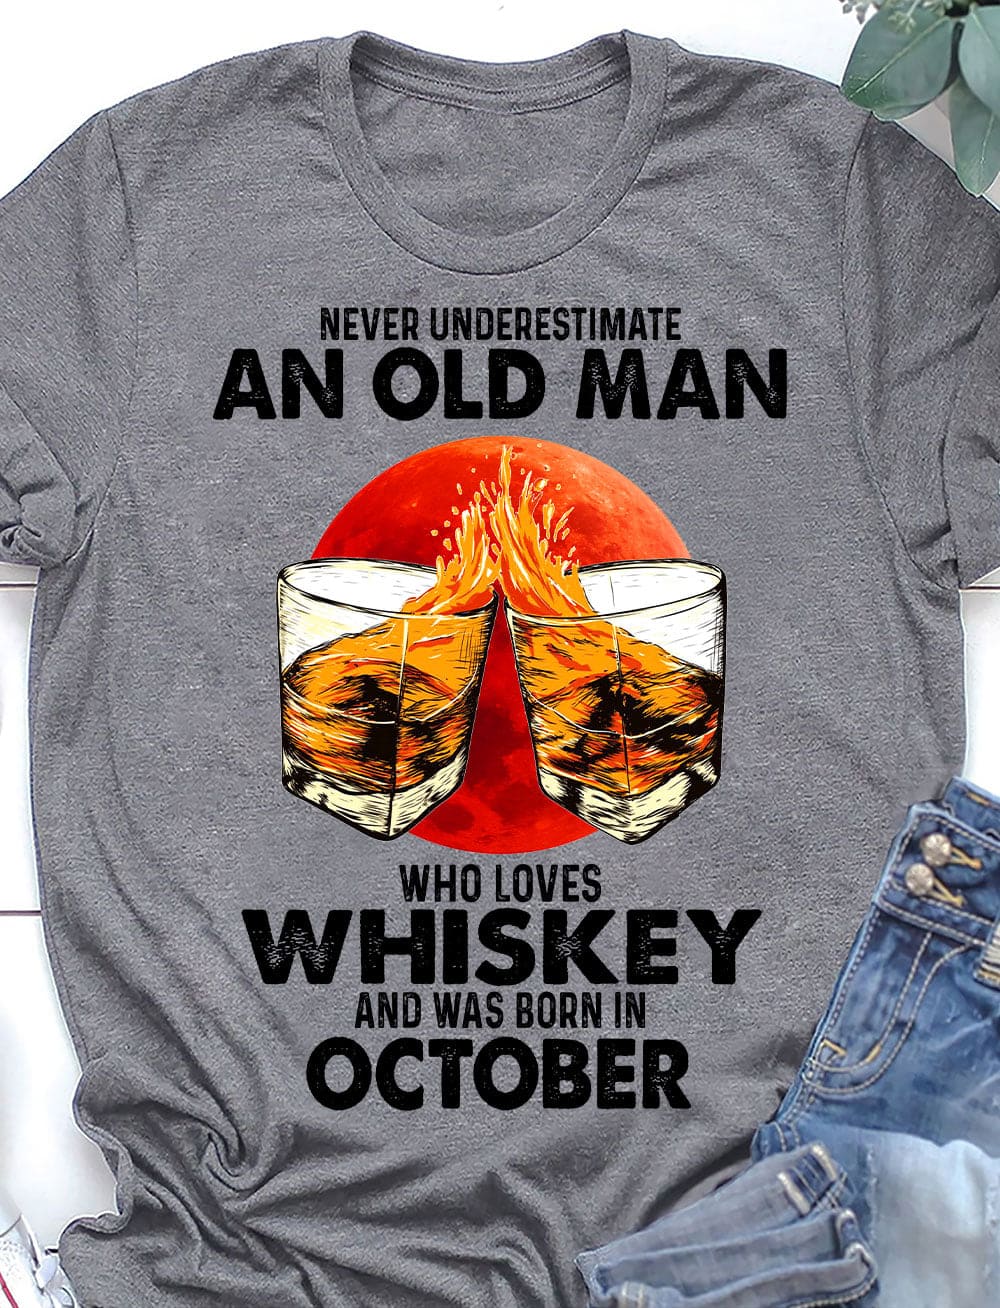 Never underestimate an old man who loves Whiskey and was born in October - October whiskey drinker